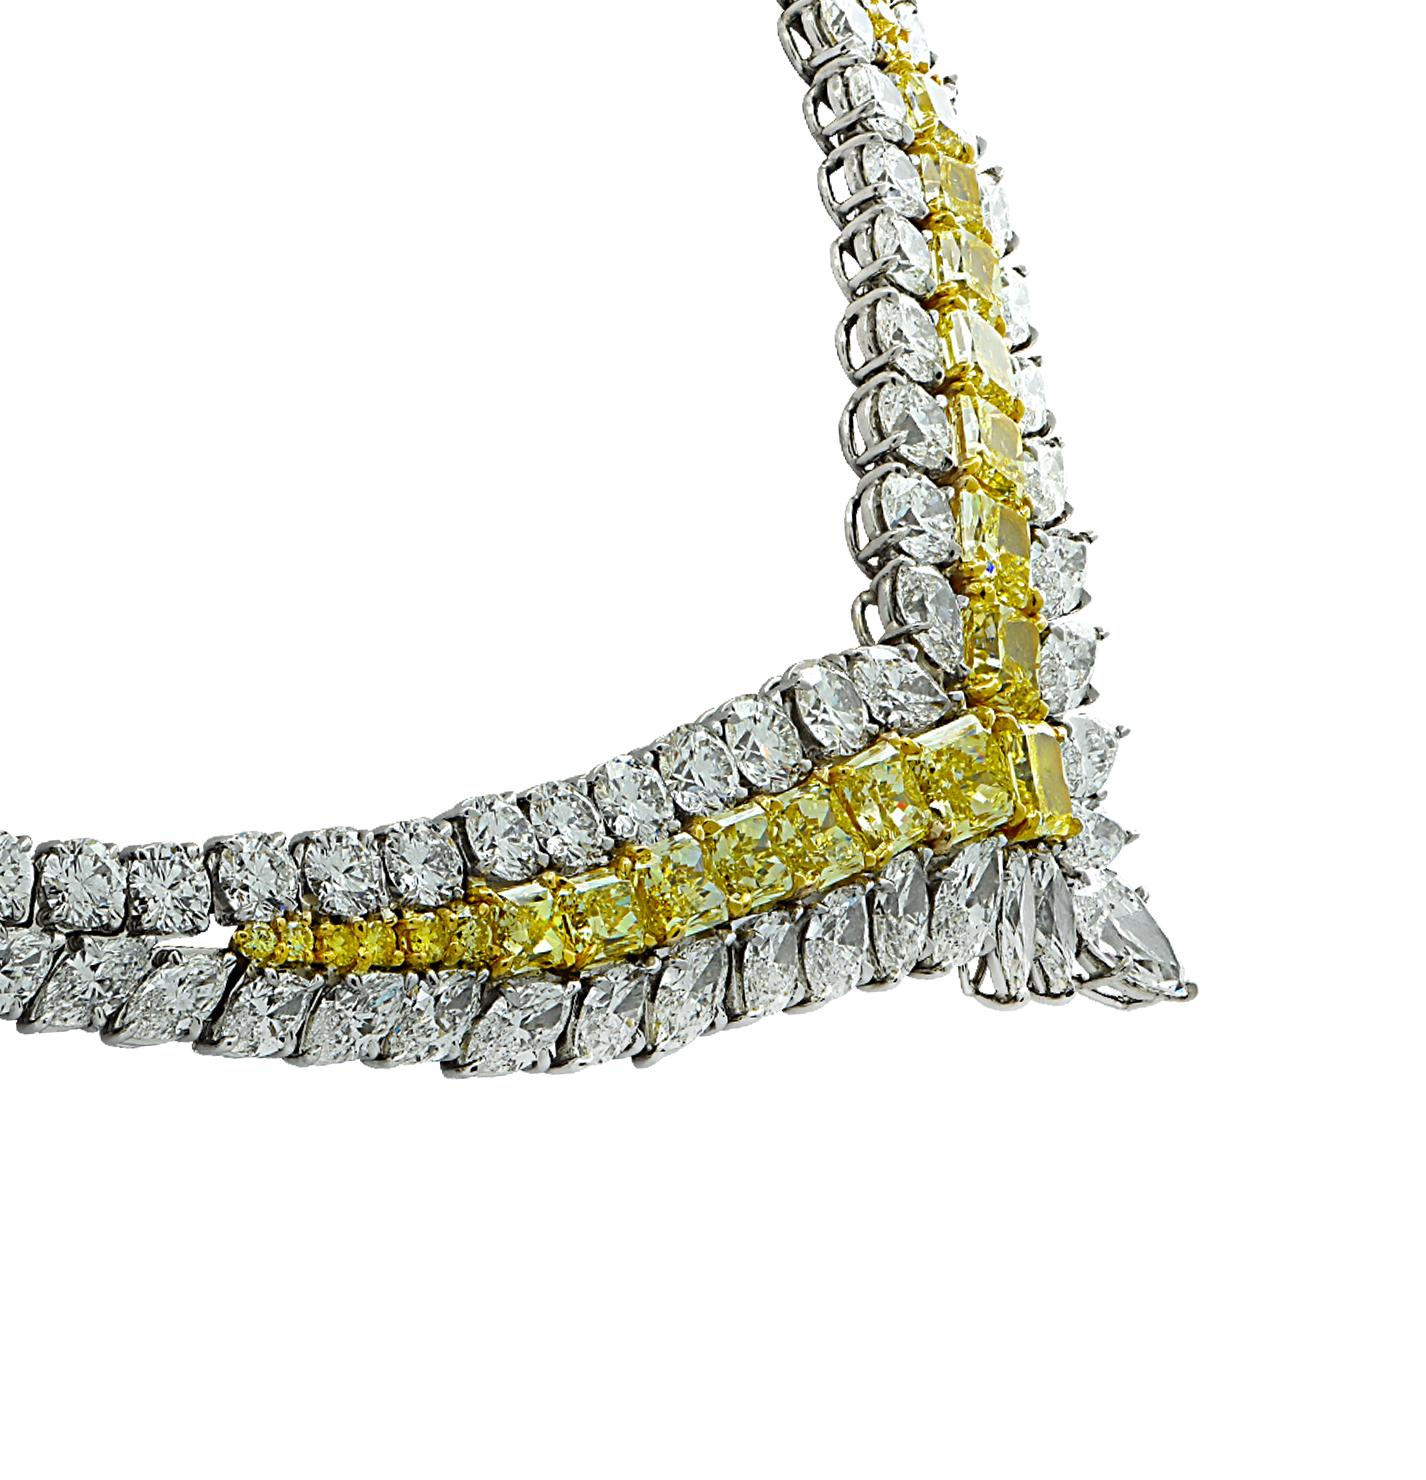 Radiant Cut 80.81 Carat GIA Certified Fancy Intense Yellow and White Diamond Necklace For Sale